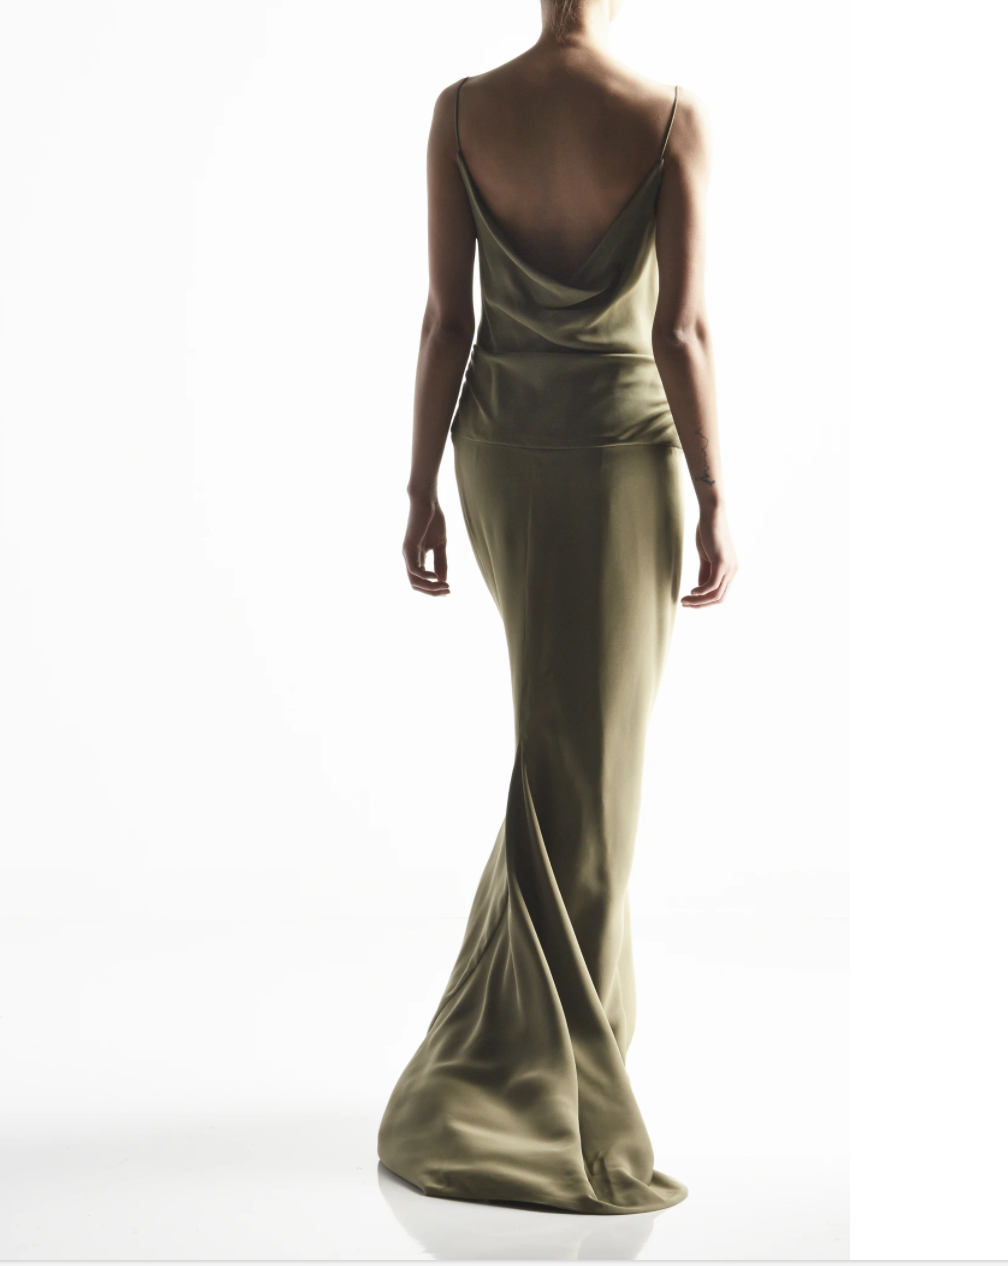 Olive green low back gown - Darby Scott